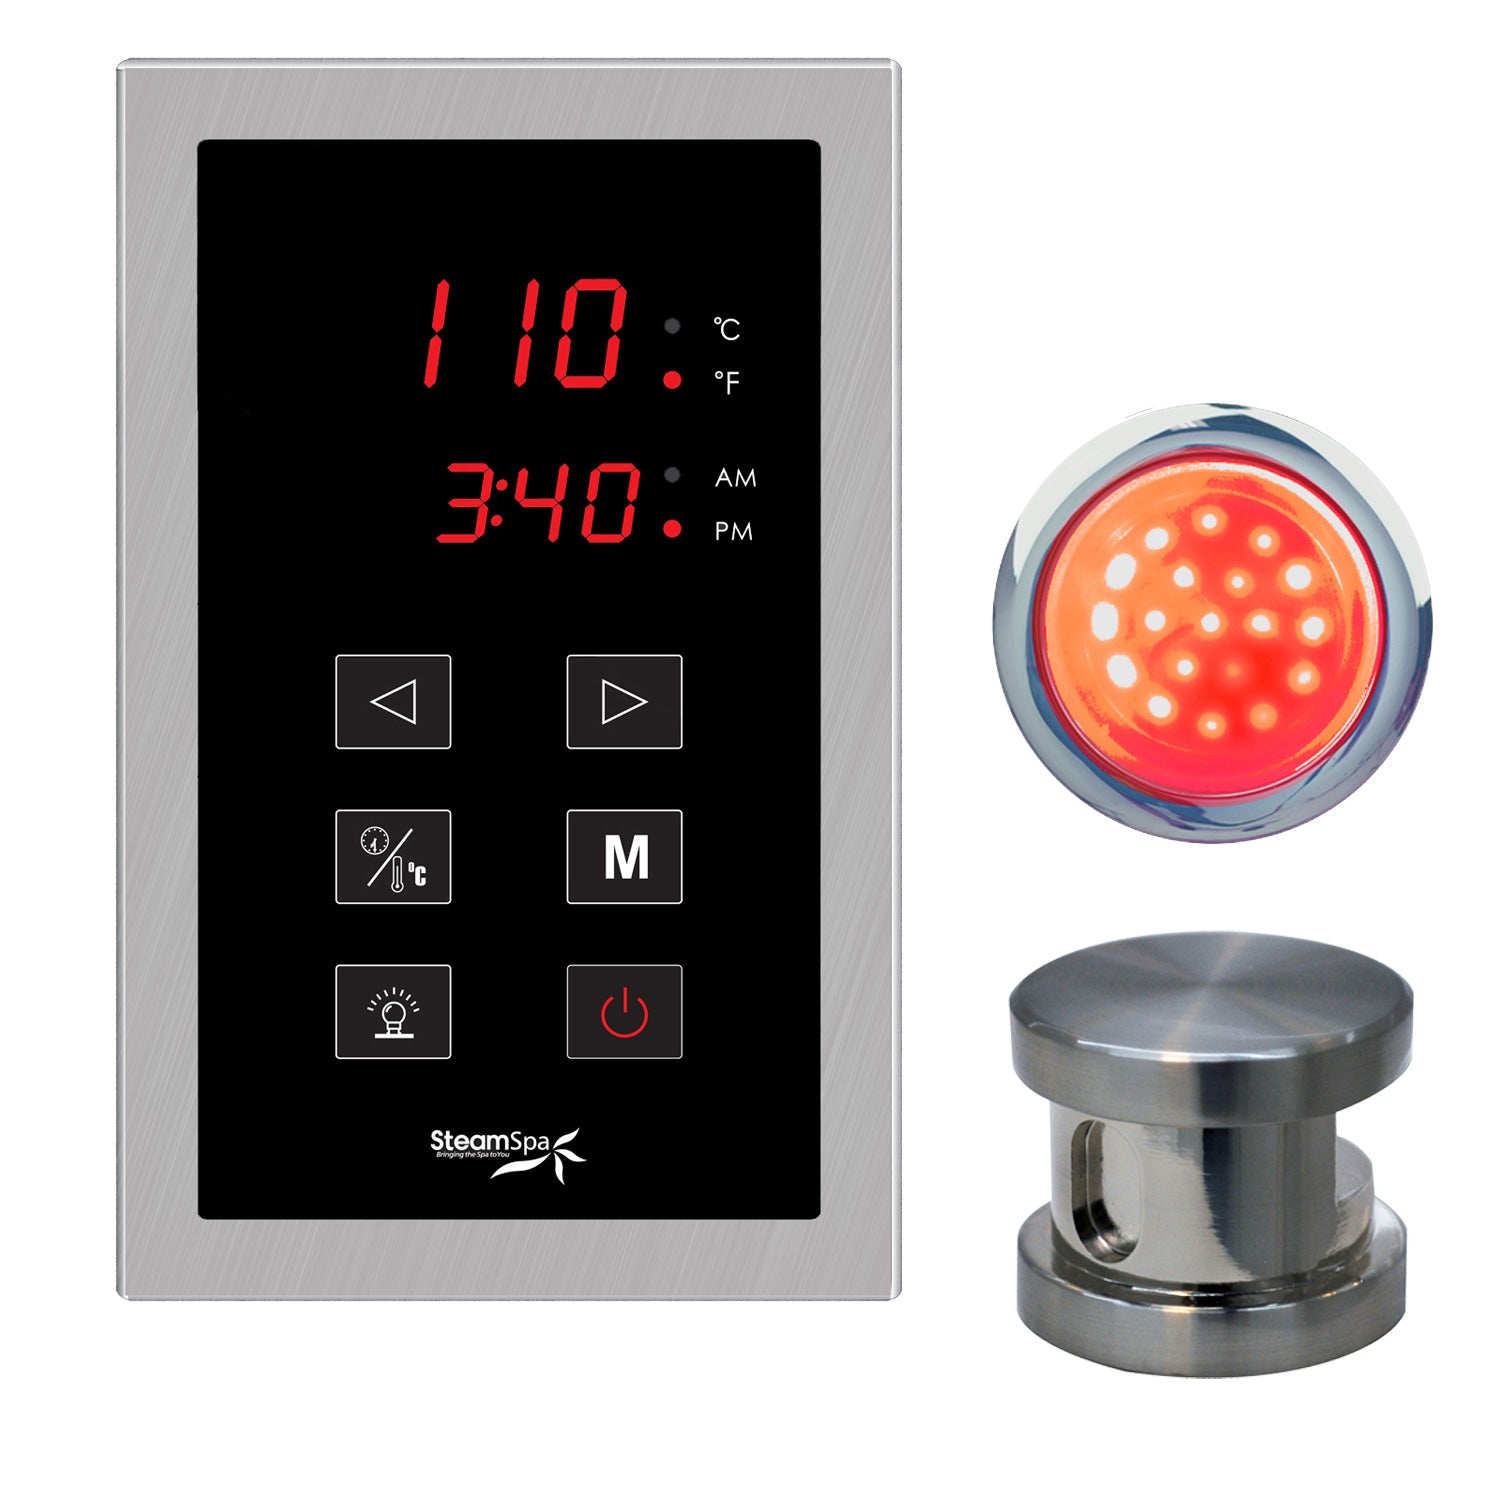 SteamSpa Indulgence Touch Panel Control Kit INTPK - Single Touch Pad Control Panel, Steam head and Chroma therapy Light - Polished Brushed nickel finish - Display time and temperature - 12 in. L x 12 in. W x 6 in. H - Vital Hydrotherapy 